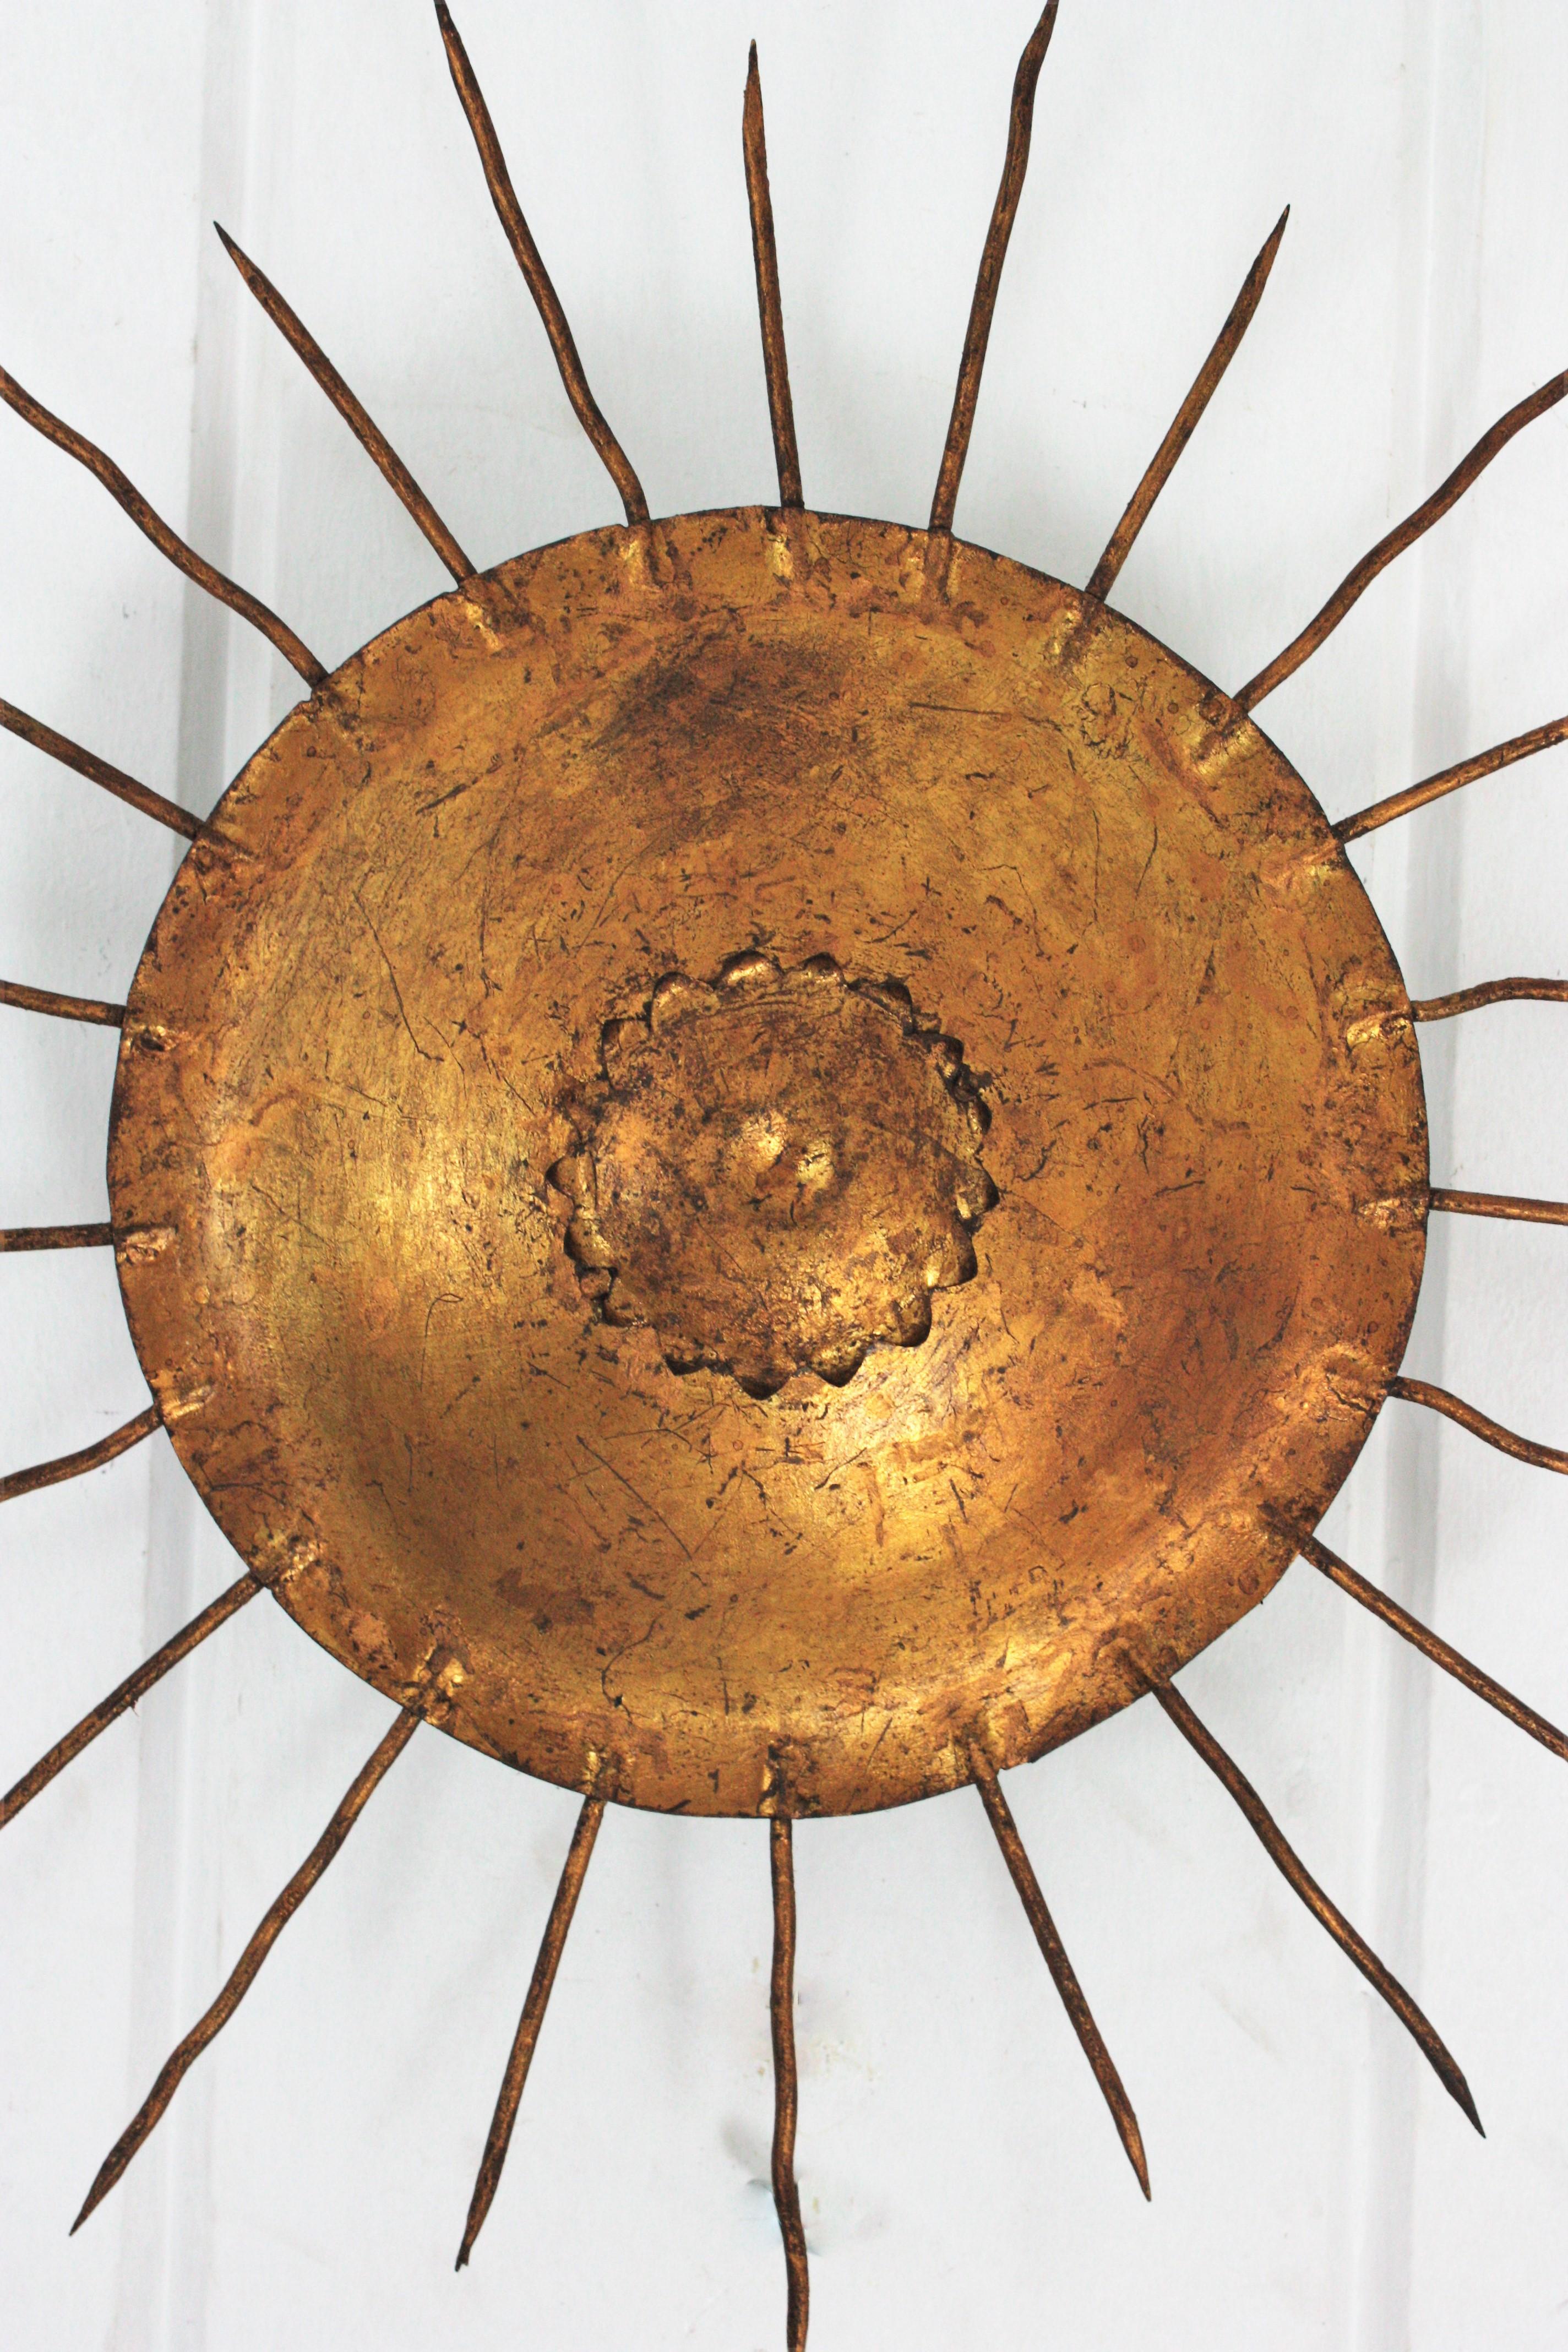 20th Century French Sunburst Ceiling Light Fixture in Gilt Wrought Iron, 1940s